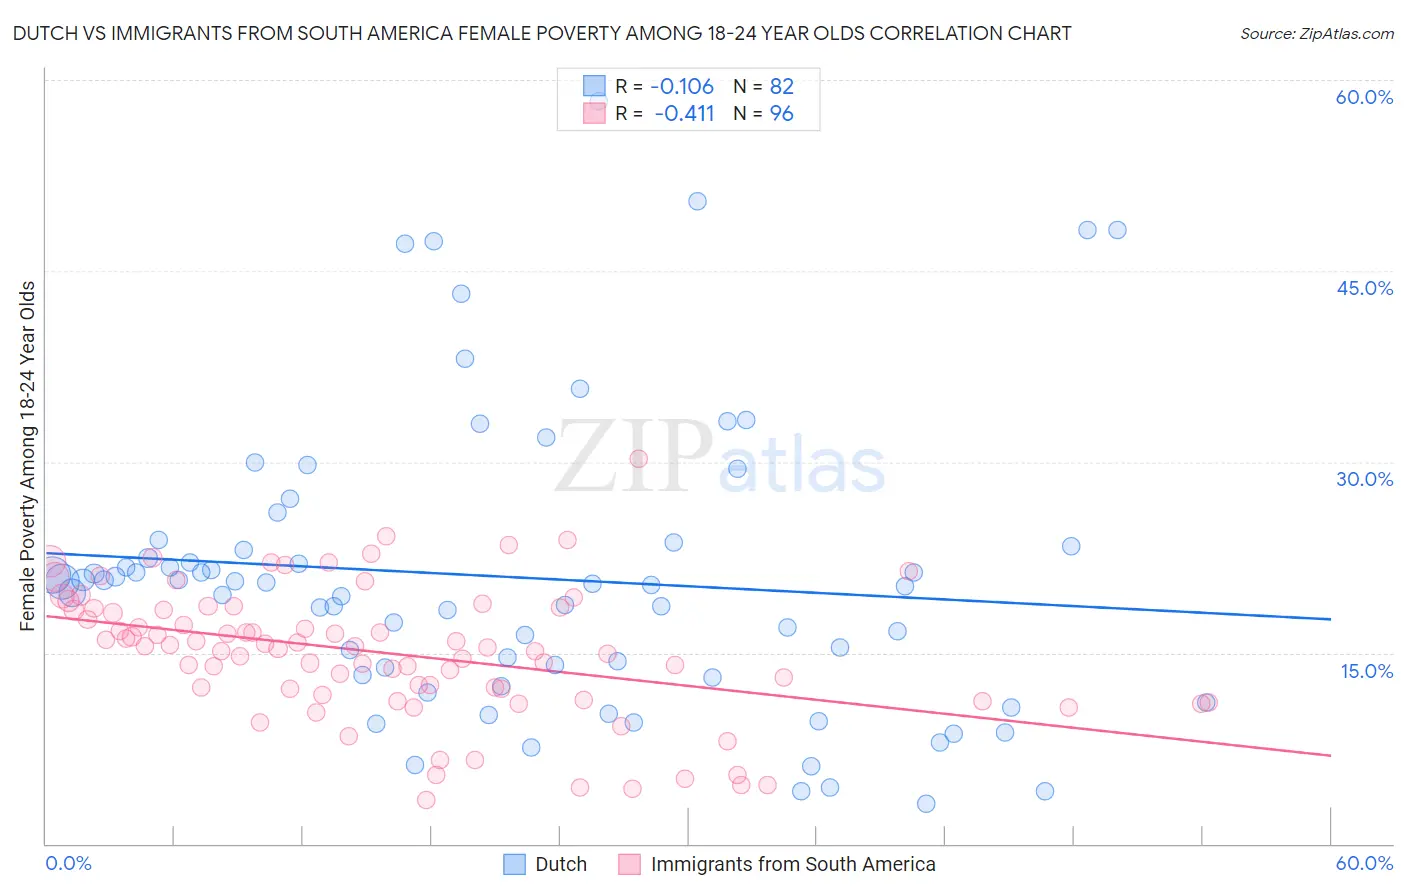 Dutch vs Immigrants from South America Female Poverty Among 18-24 Year Olds